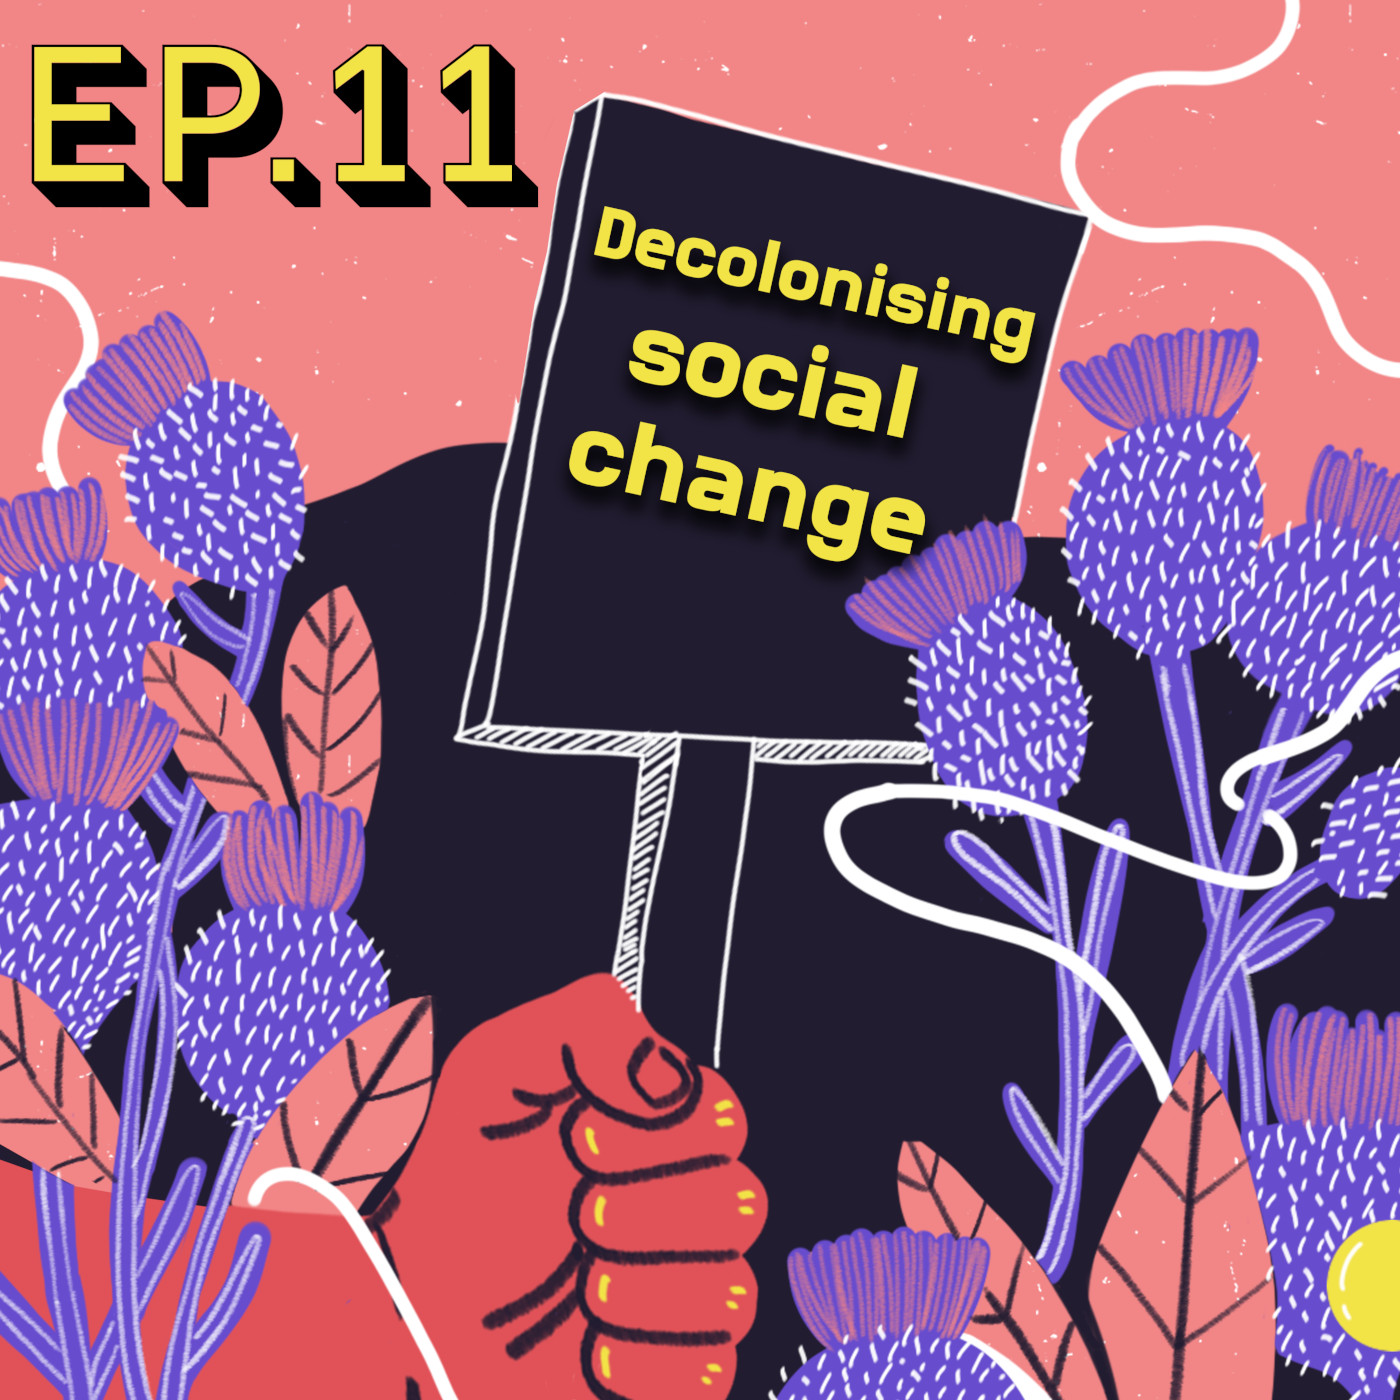 Decolonising local organising (Rabab from Gentle/Radical)